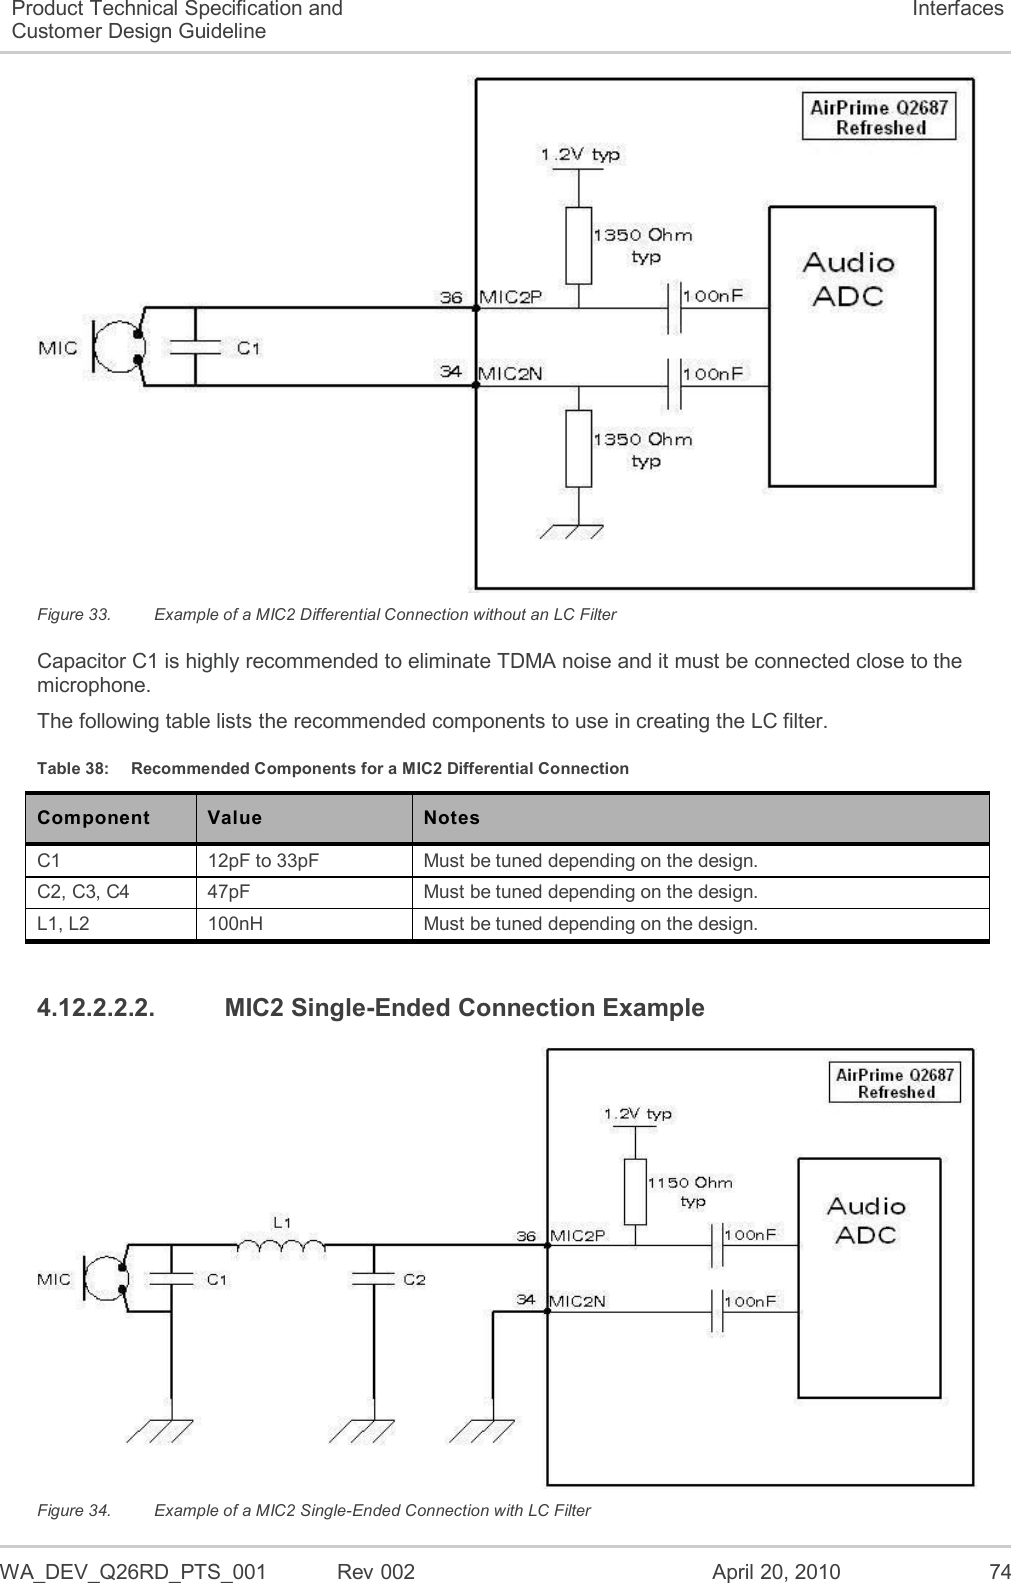  WA_DEV_Q26RD_PTS_001  Rev 002  April 20, 2010 74 Product Technical Specification and Customer Design Guideline Interfaces  Figure 33.  Example of a MIC2 Differential Connection without an LC Filter Capacitor C1 is highly recommended to eliminate TDMA noise and it must be connected close to the microphone. The following table lists the recommended components to use in creating the LC filter. Table 38:  Recommended Components for a MIC2 Differential Connection Component Value Notes C1 12pF to 33pF Must be tuned depending on the design. C2, C3, C4 47pF Must be tuned depending on the design. L1, L2 100nH Must be tuned depending on the design. 4.12.2.2.2.  MIC2 Single-Ended Connection Example  Figure 34.  Example of a MIC2 Single-Ended Connection with LC Filter 